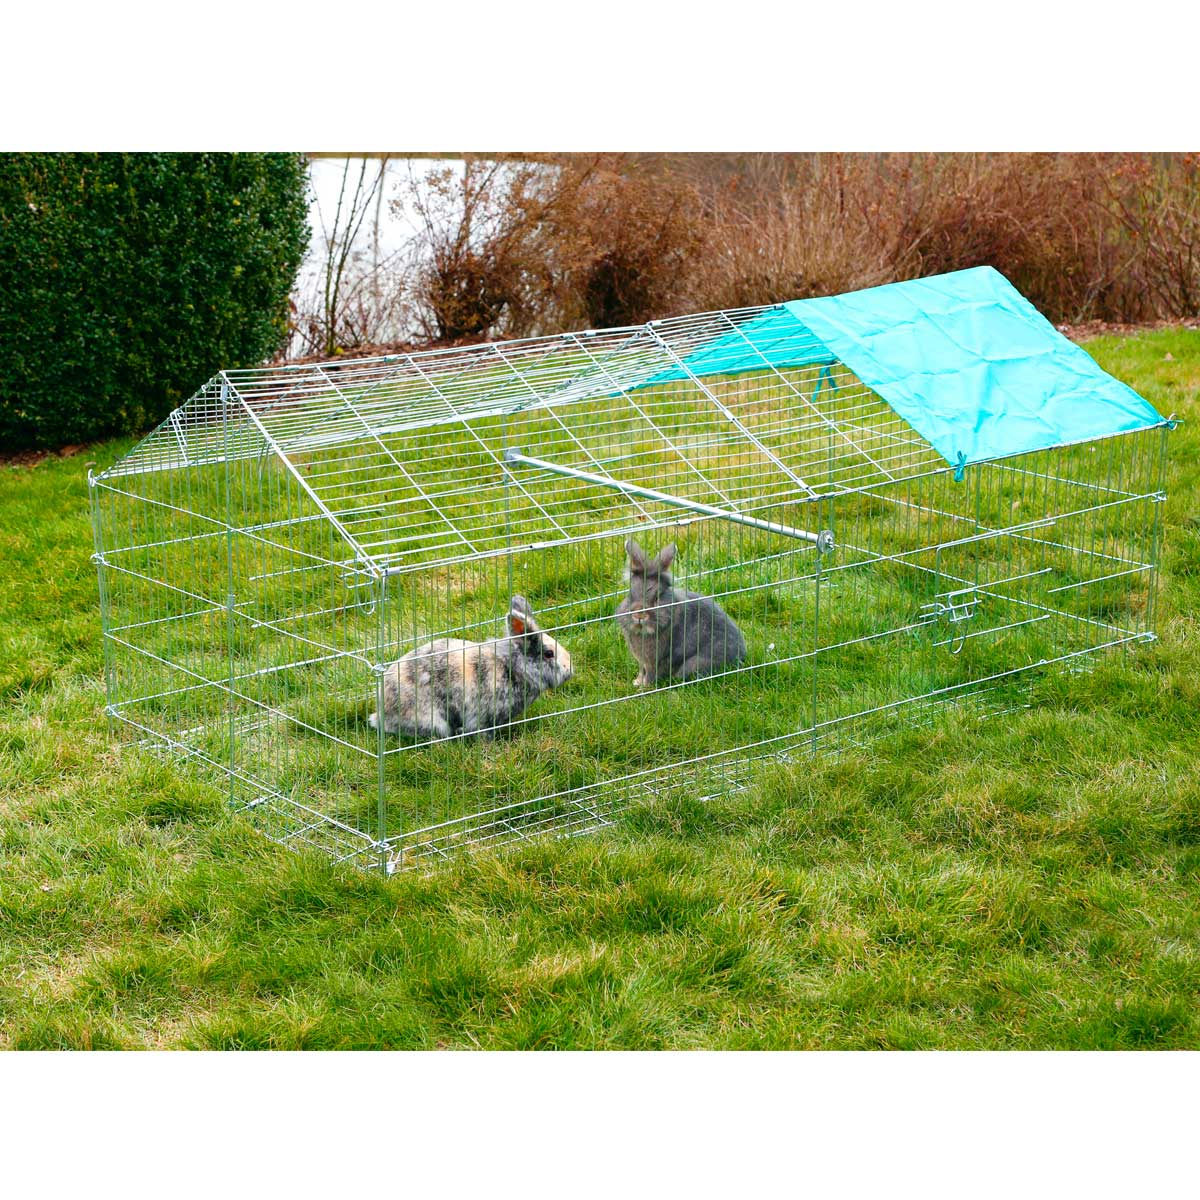 Open-air enclosure with breakout barrier,180x90x75cm